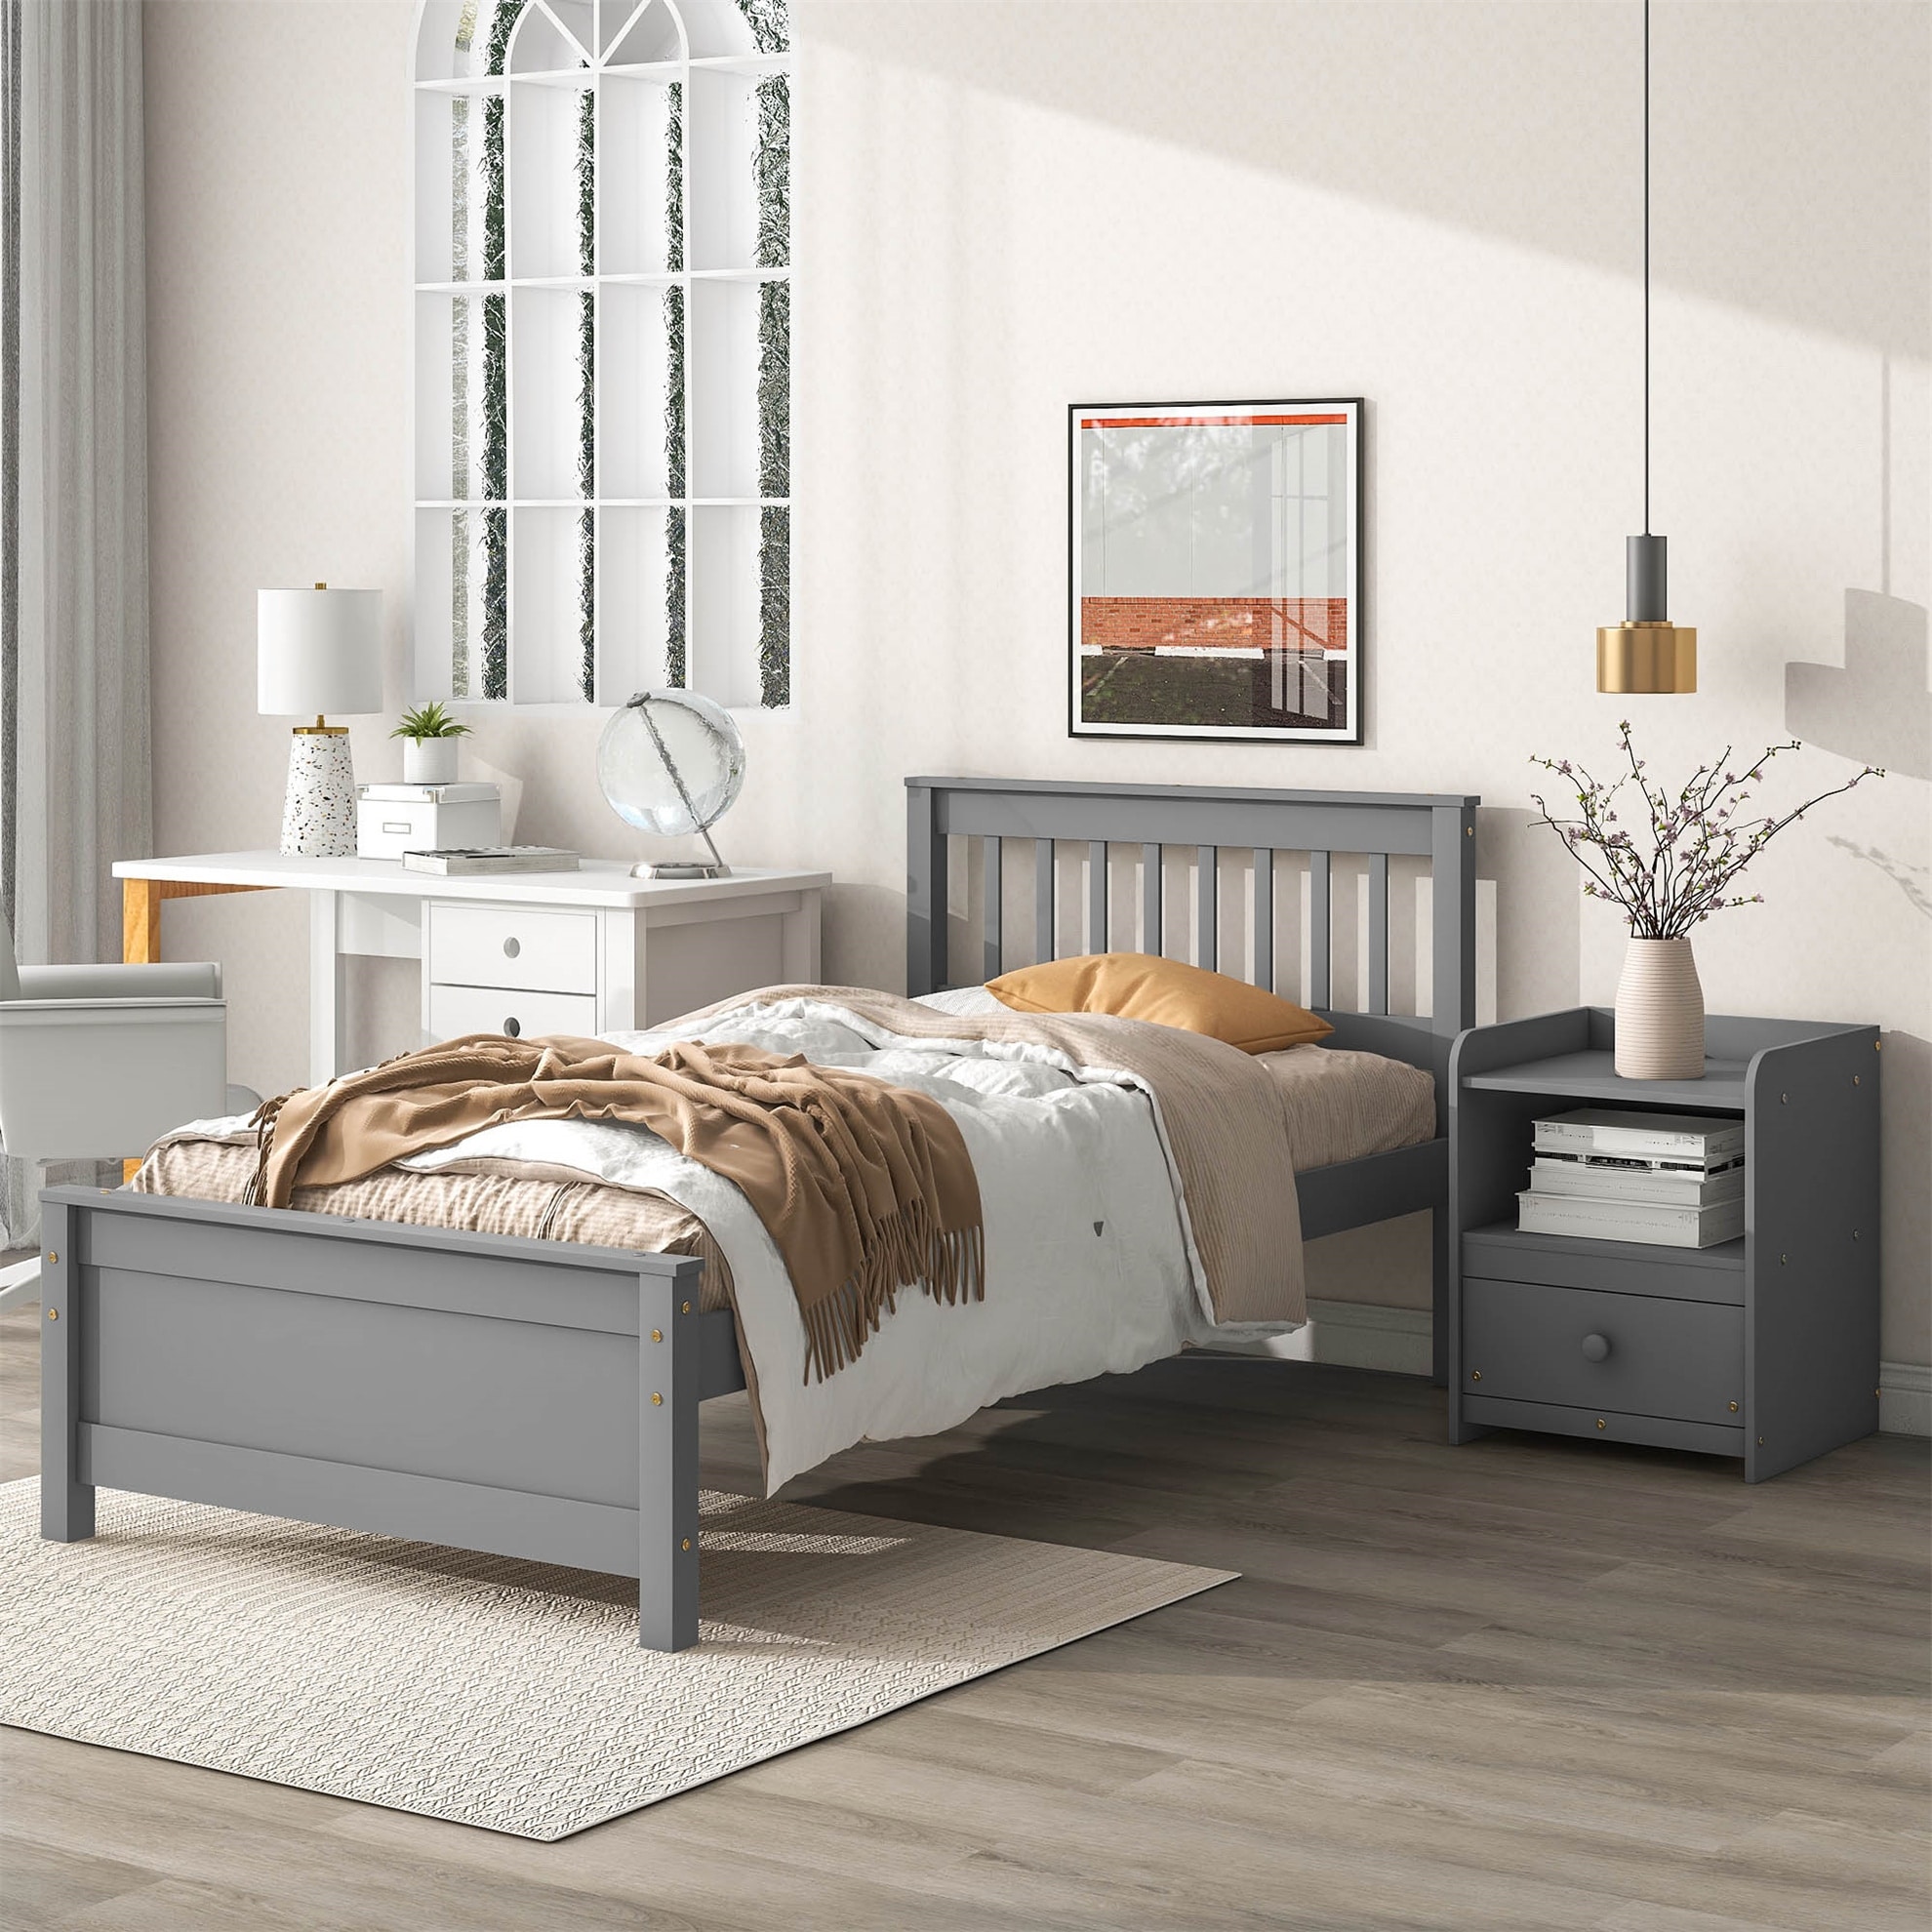 CLEARANCE! Gray Kids Teens Solid Wood 3 Pieces Twin Bedroom Sets,full bed +  nightstand *2